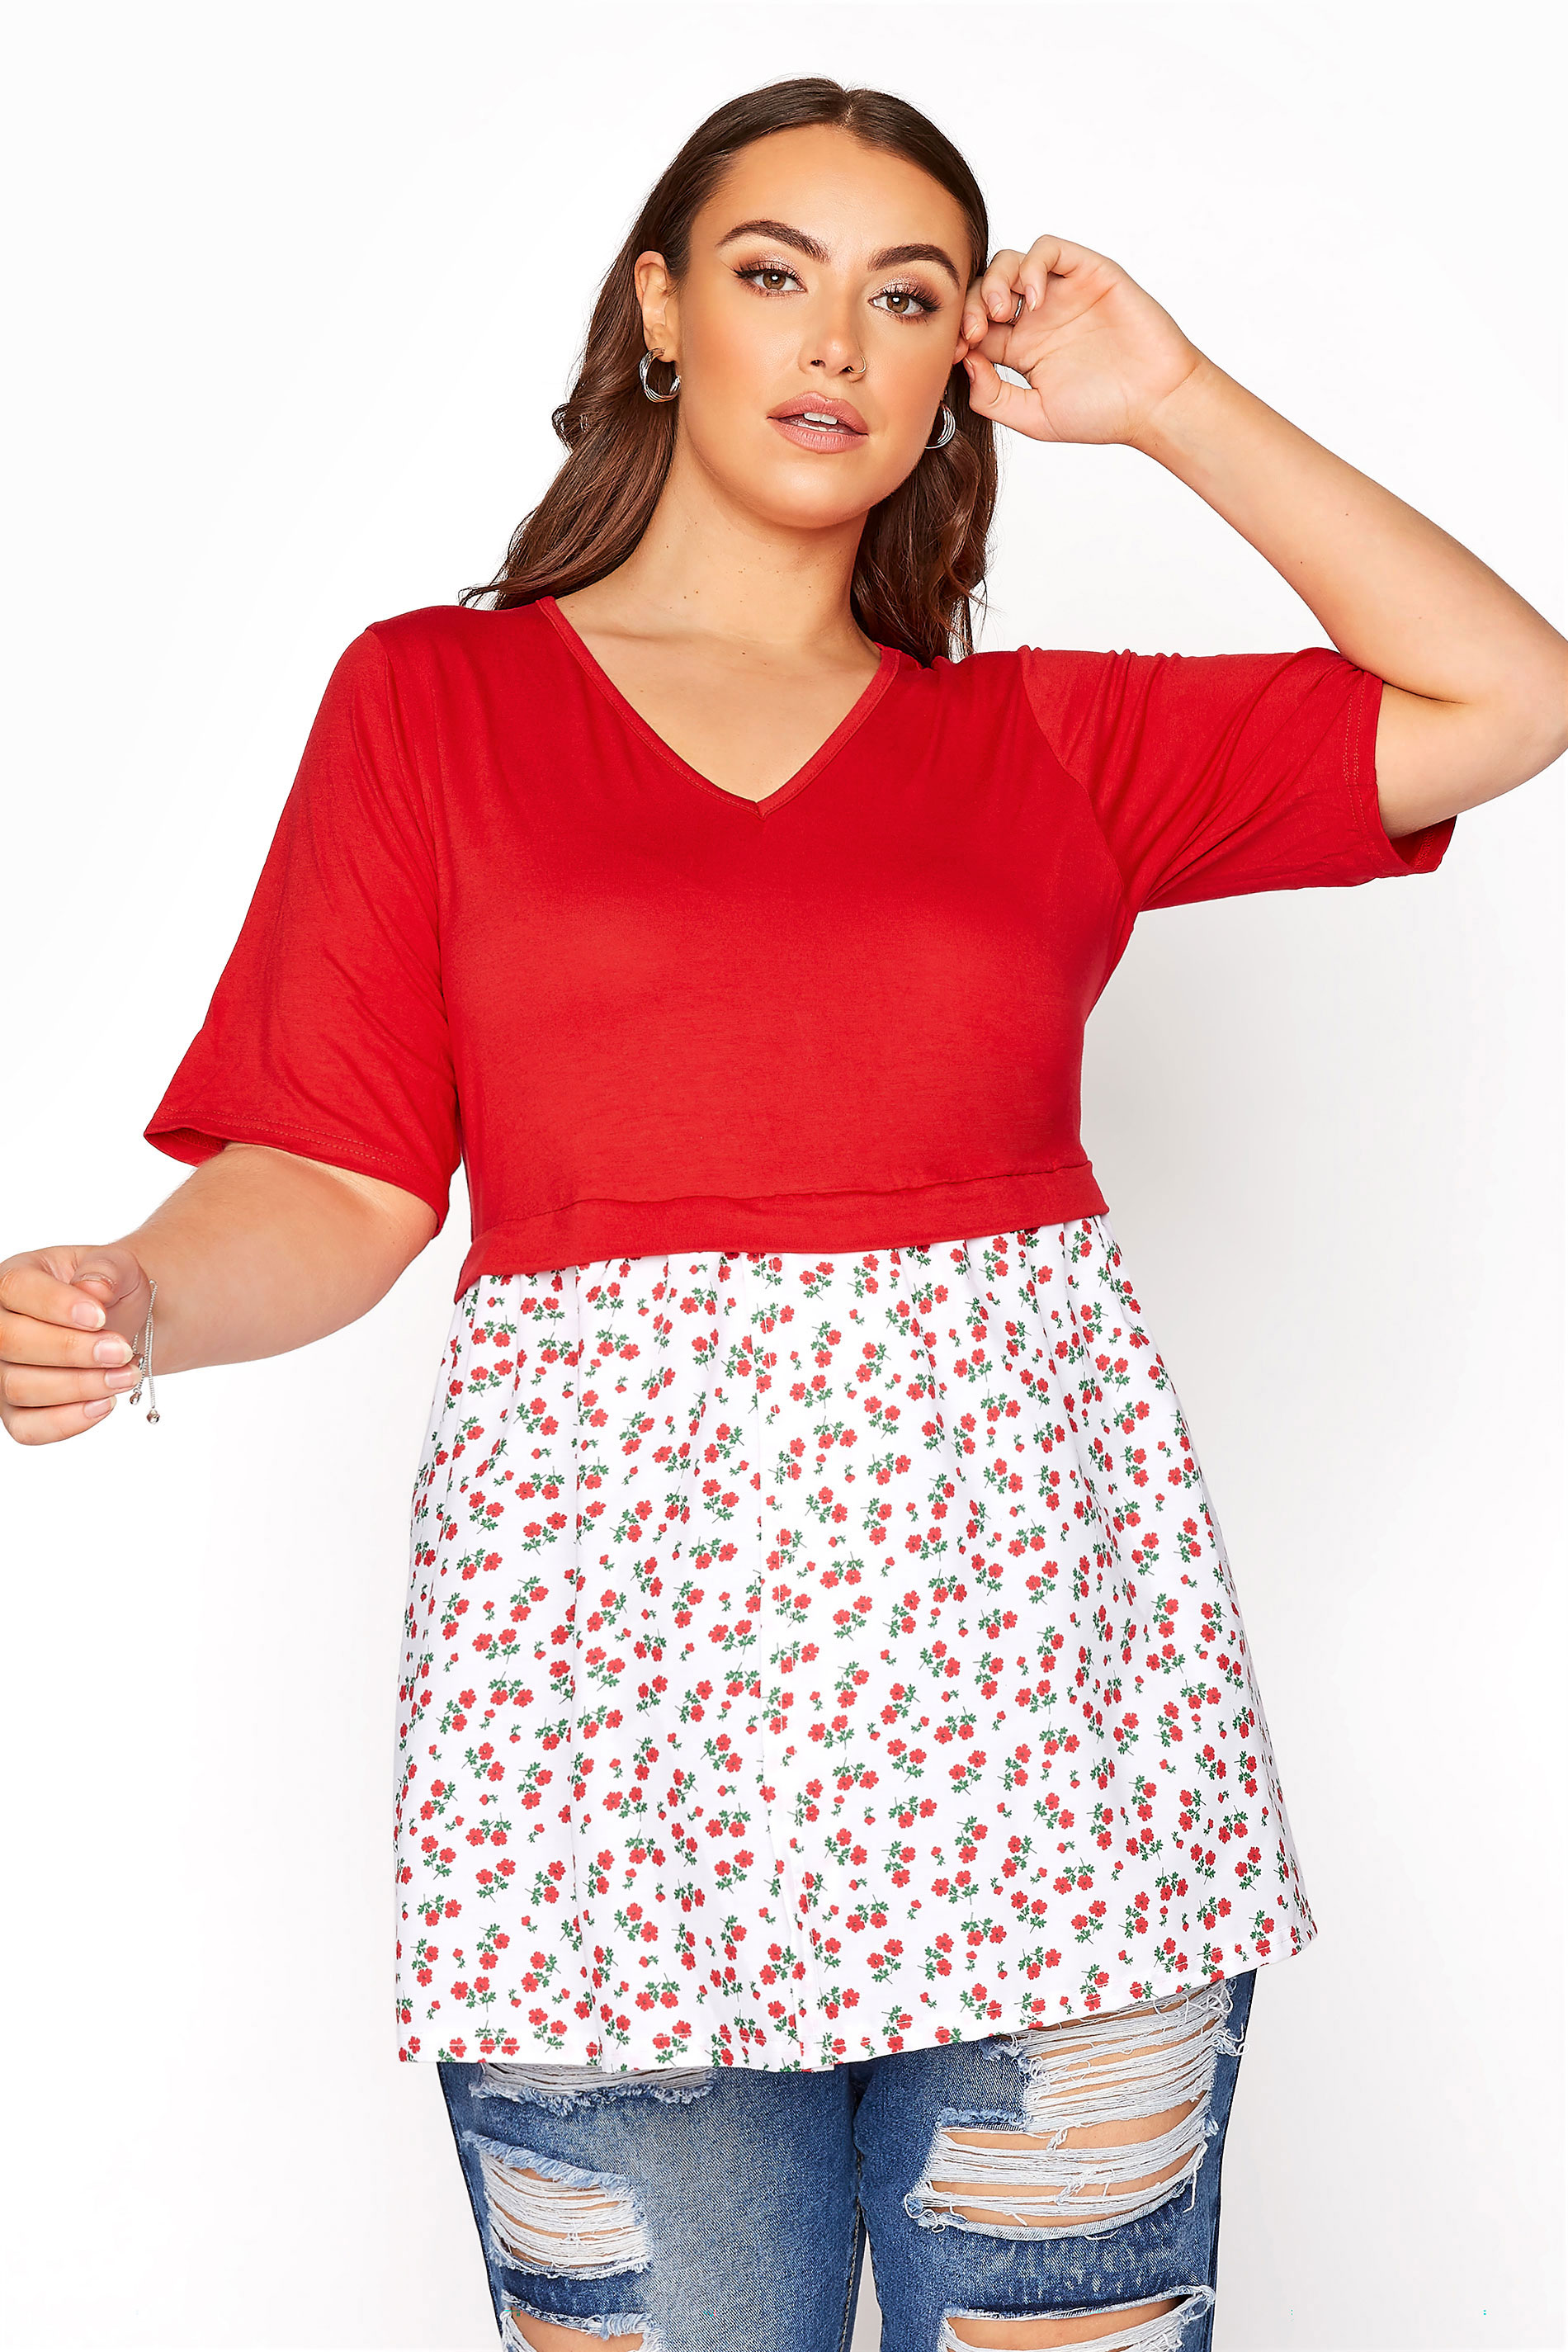 LIMITED COLLECTION Bright Red Floral Peplum Top_A.jpg